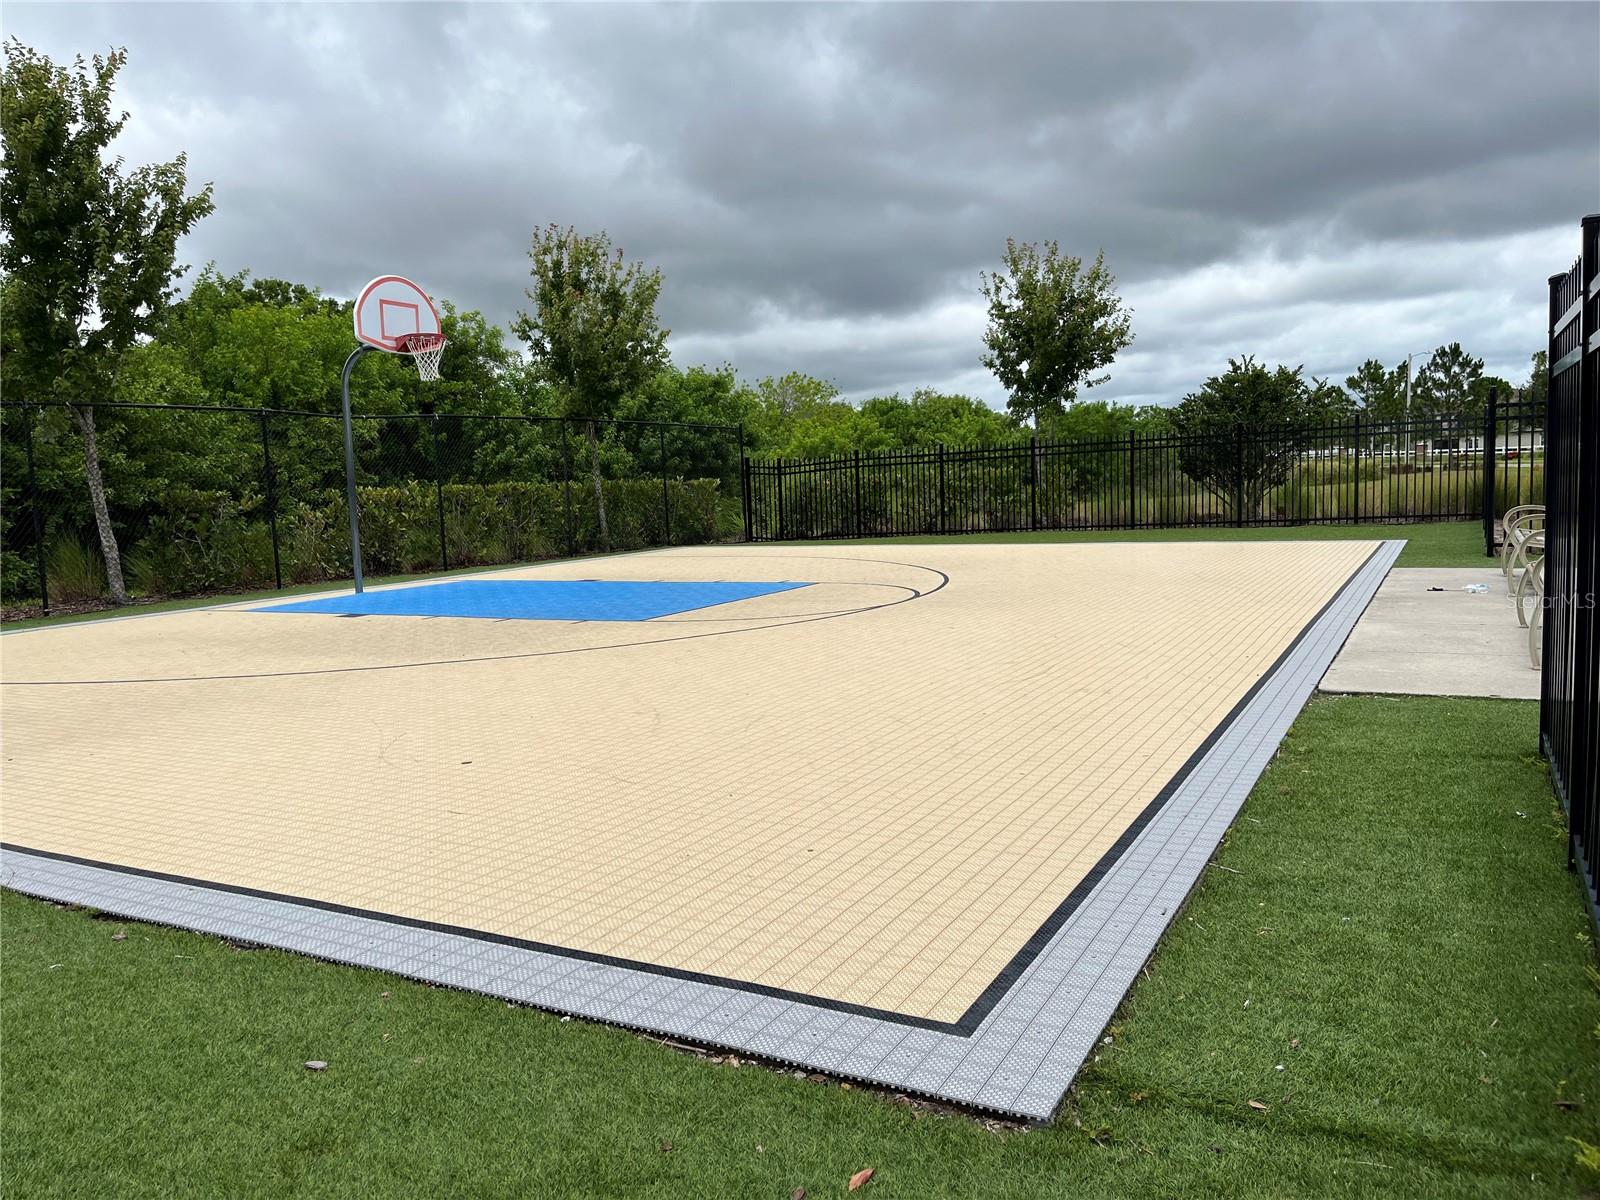 Basketball court near pool and playground, with nice seat benches